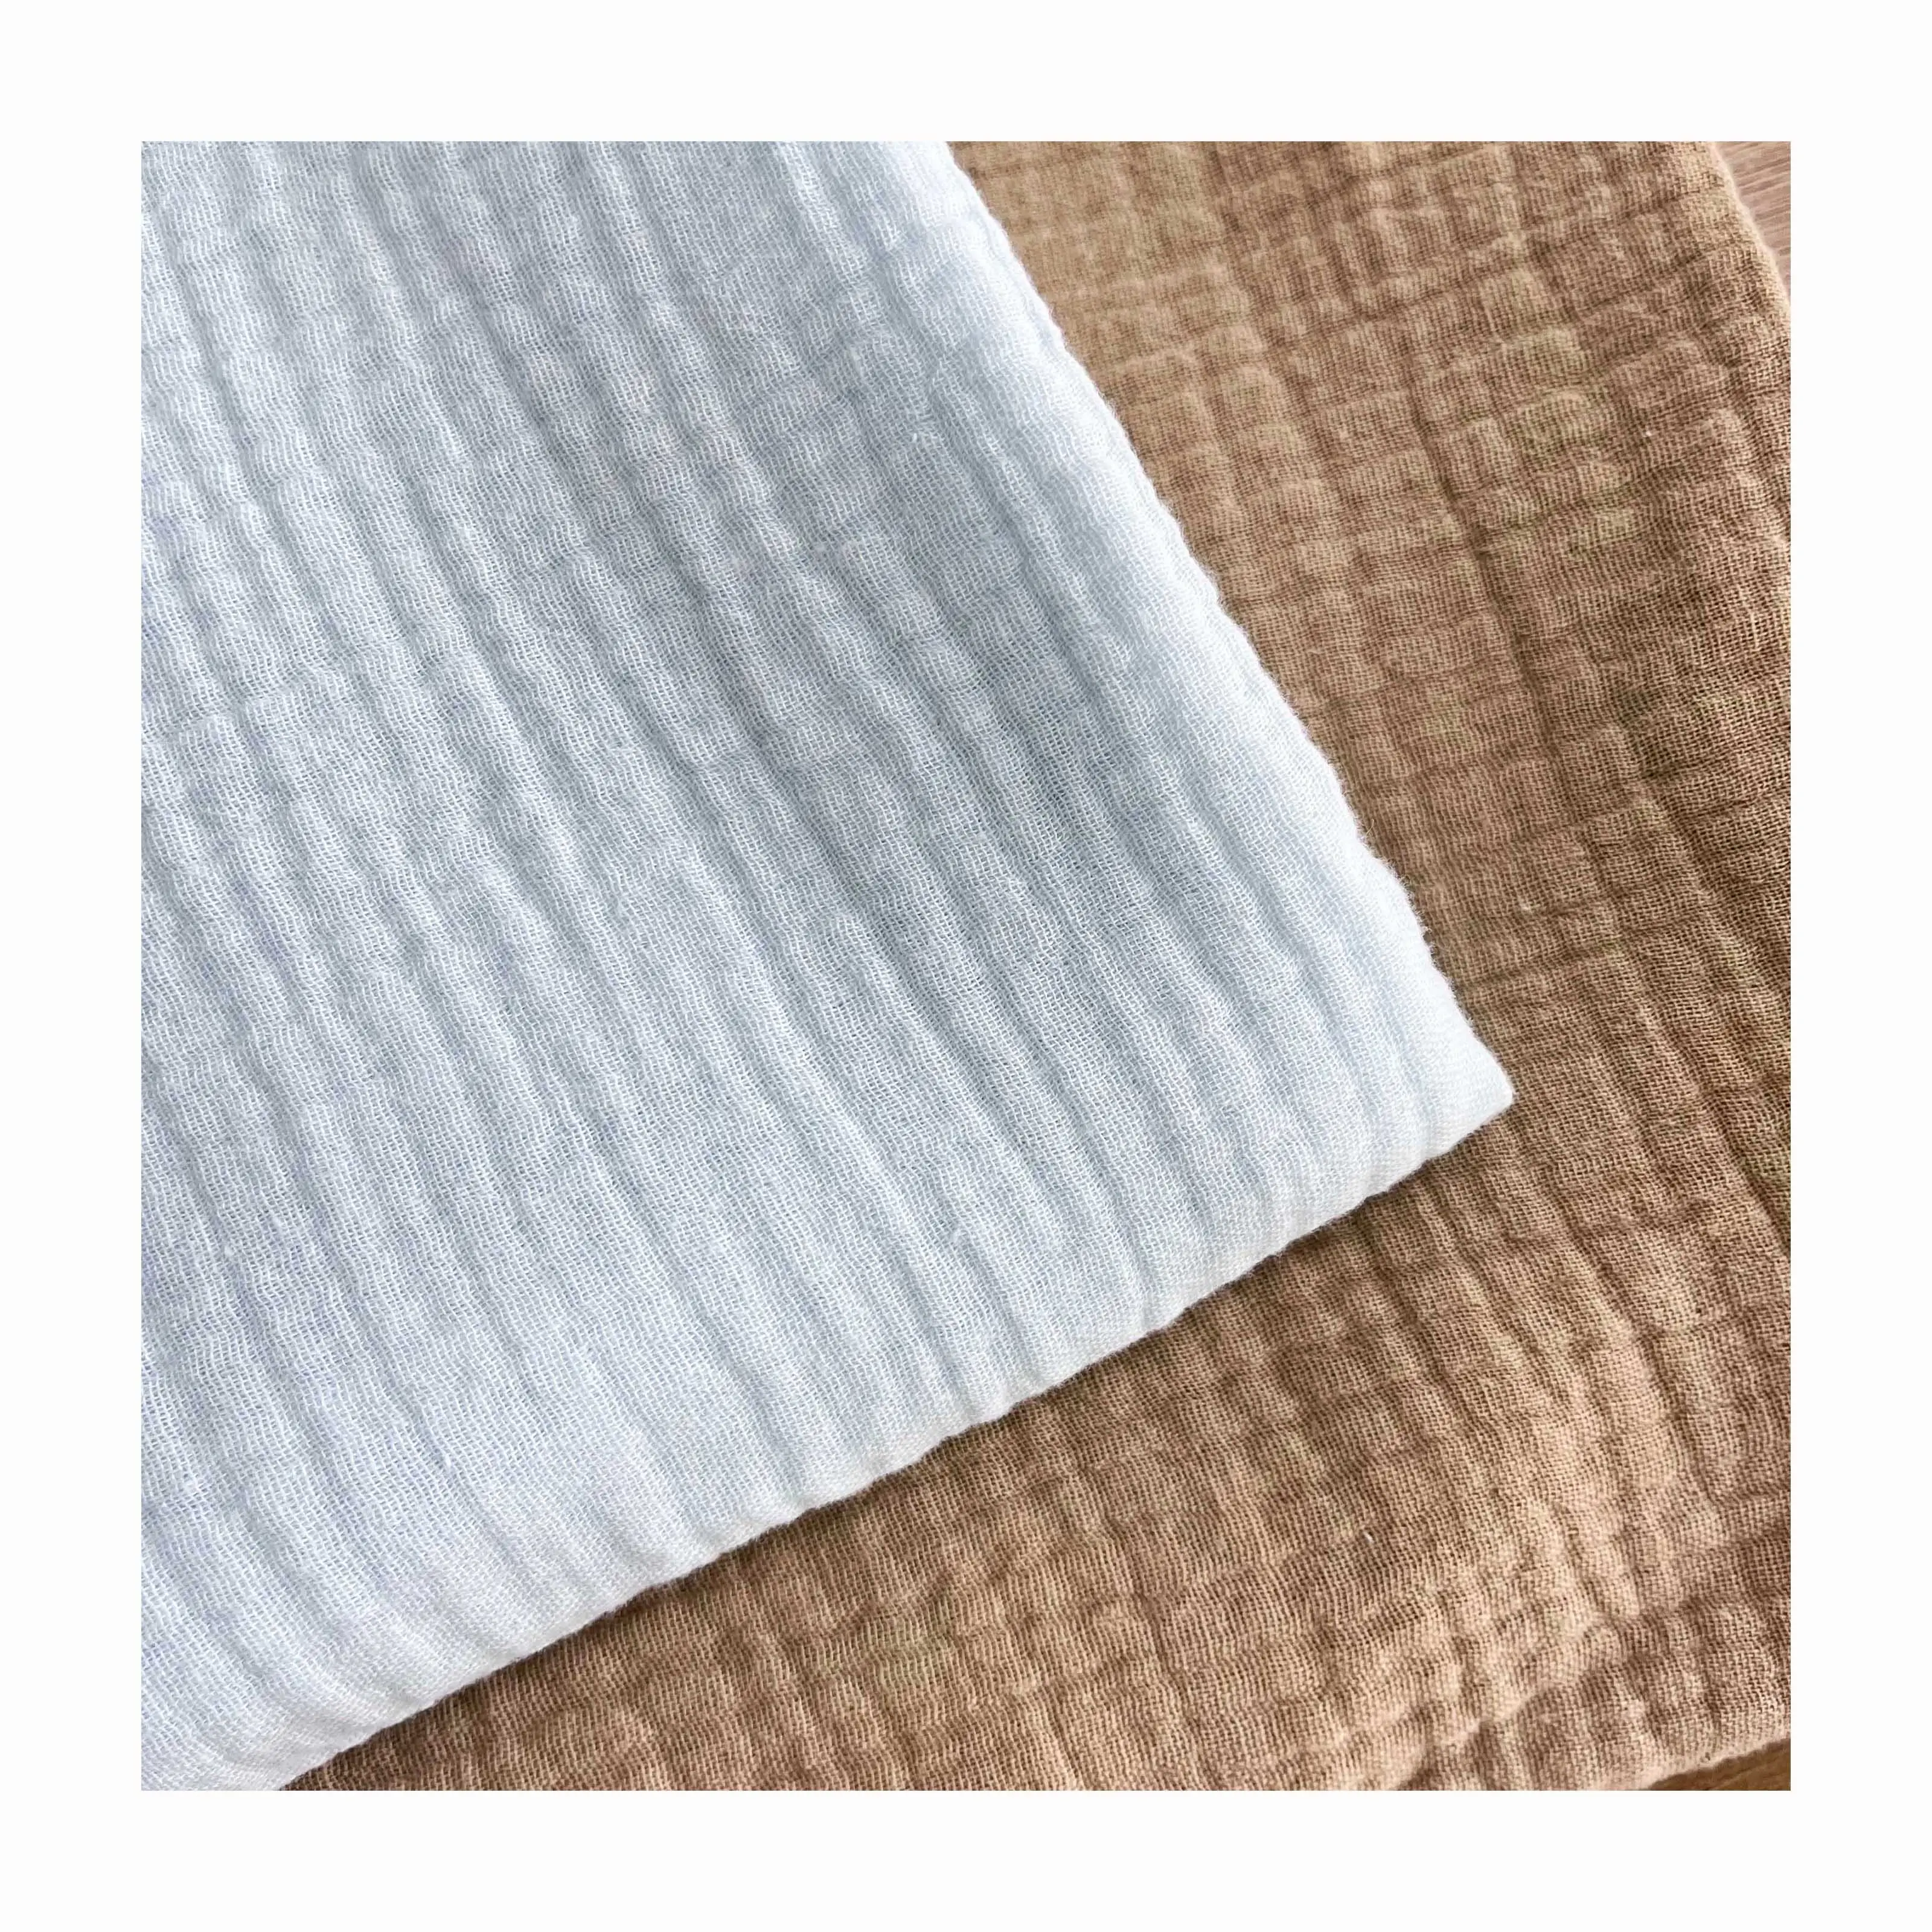 China manufacturer eco-friendly textile 40S 100% cotton double layer gauze muslin fabric soft breathable for garment